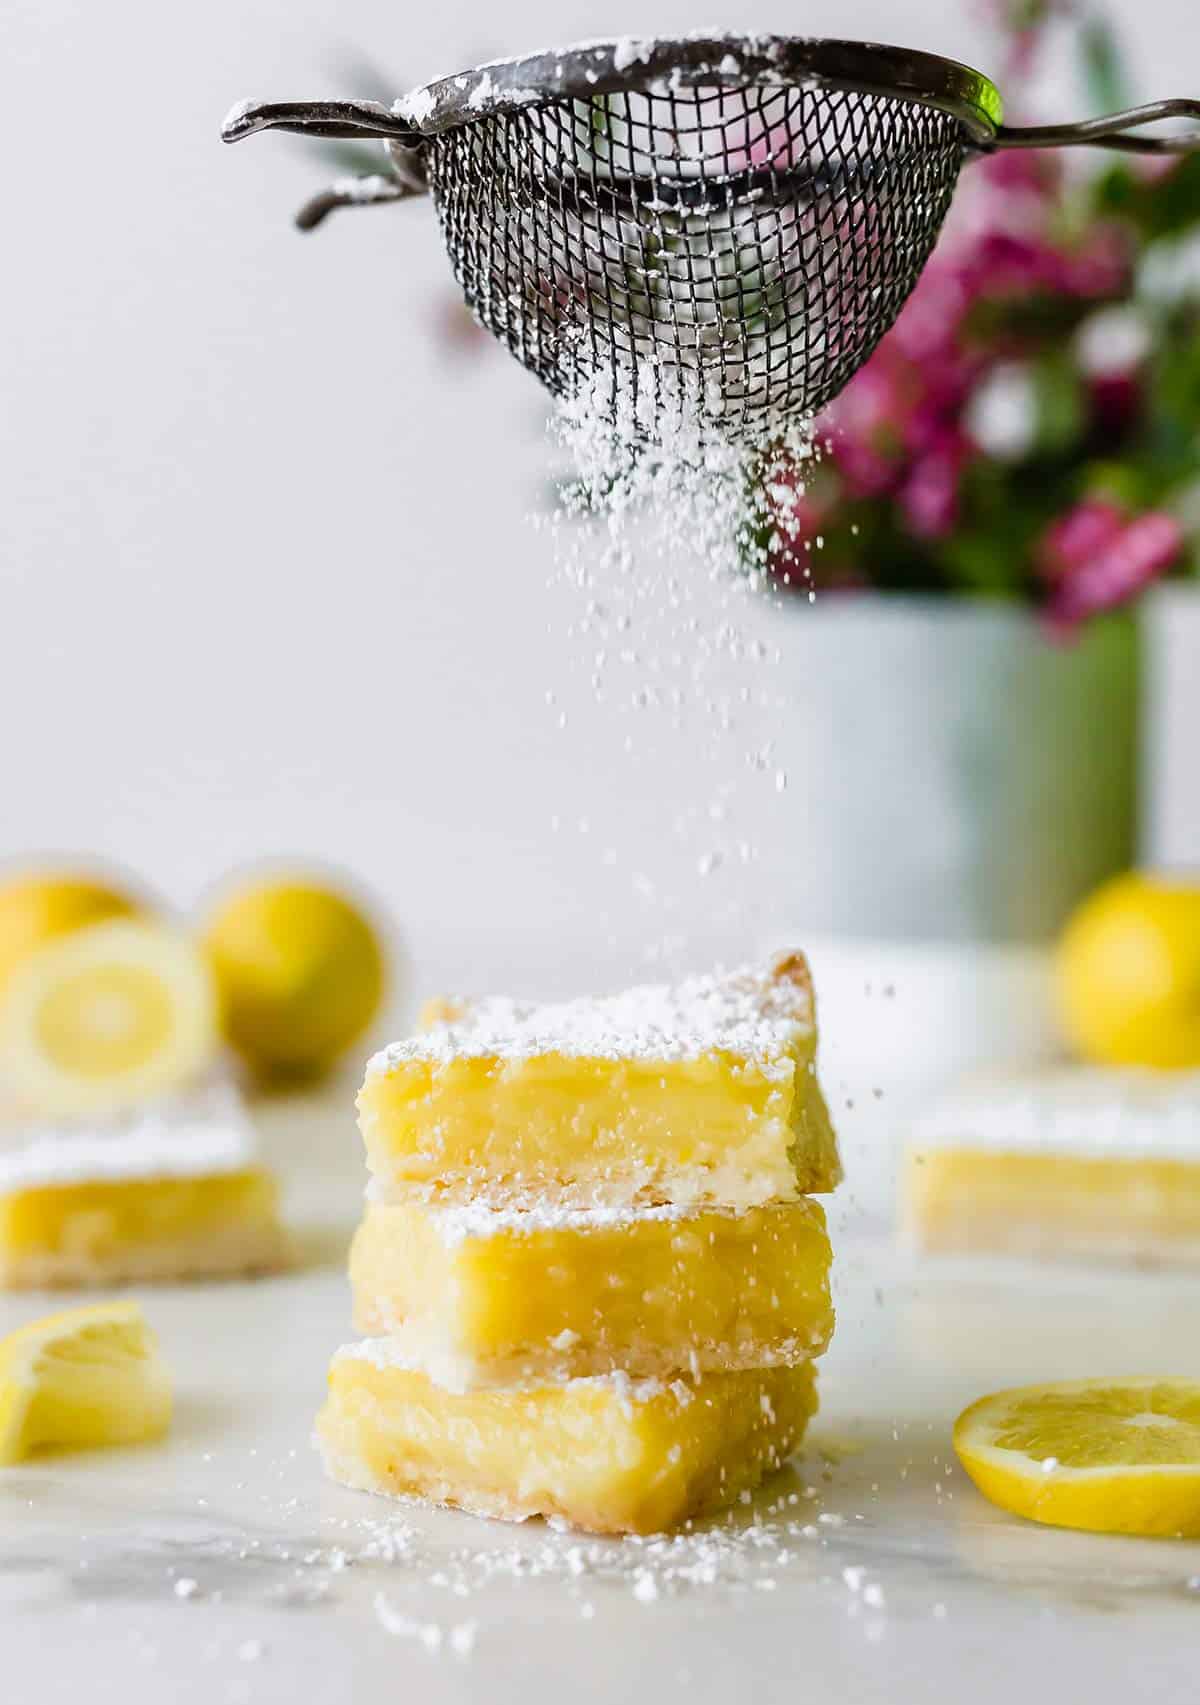 A stack of three lemon bars being sprinkled with powdered sugar.